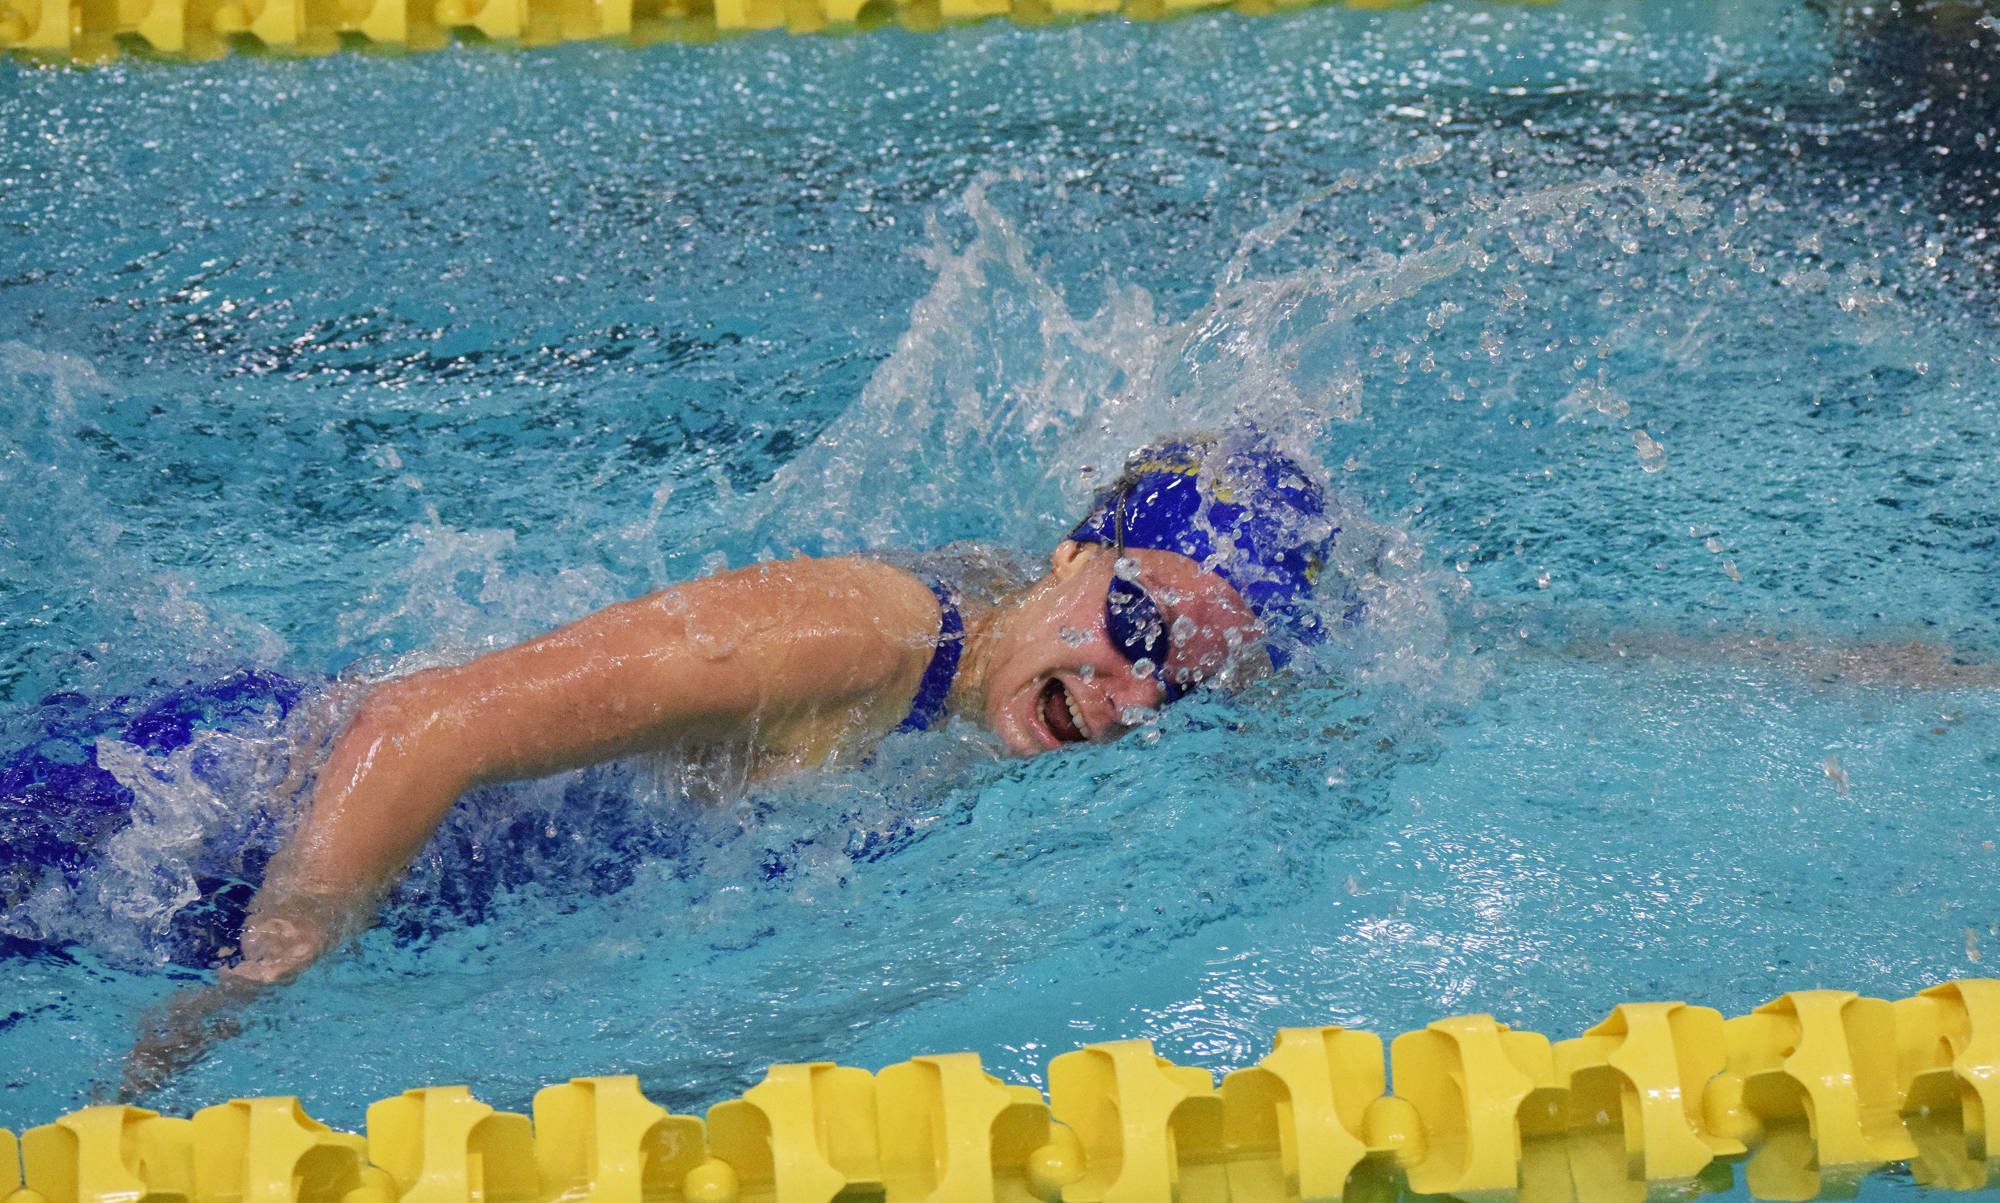 Homer’s Madison Story races in the girls 200-yard Individual Medley Saturday, Nov. 4, 2017 at the ASAA First National Bank State Swimming & Diving Championships at the Bartlett High pool in Anchorage, Alaska. (Photo by Joey Klecka/Peninsula Clarion)